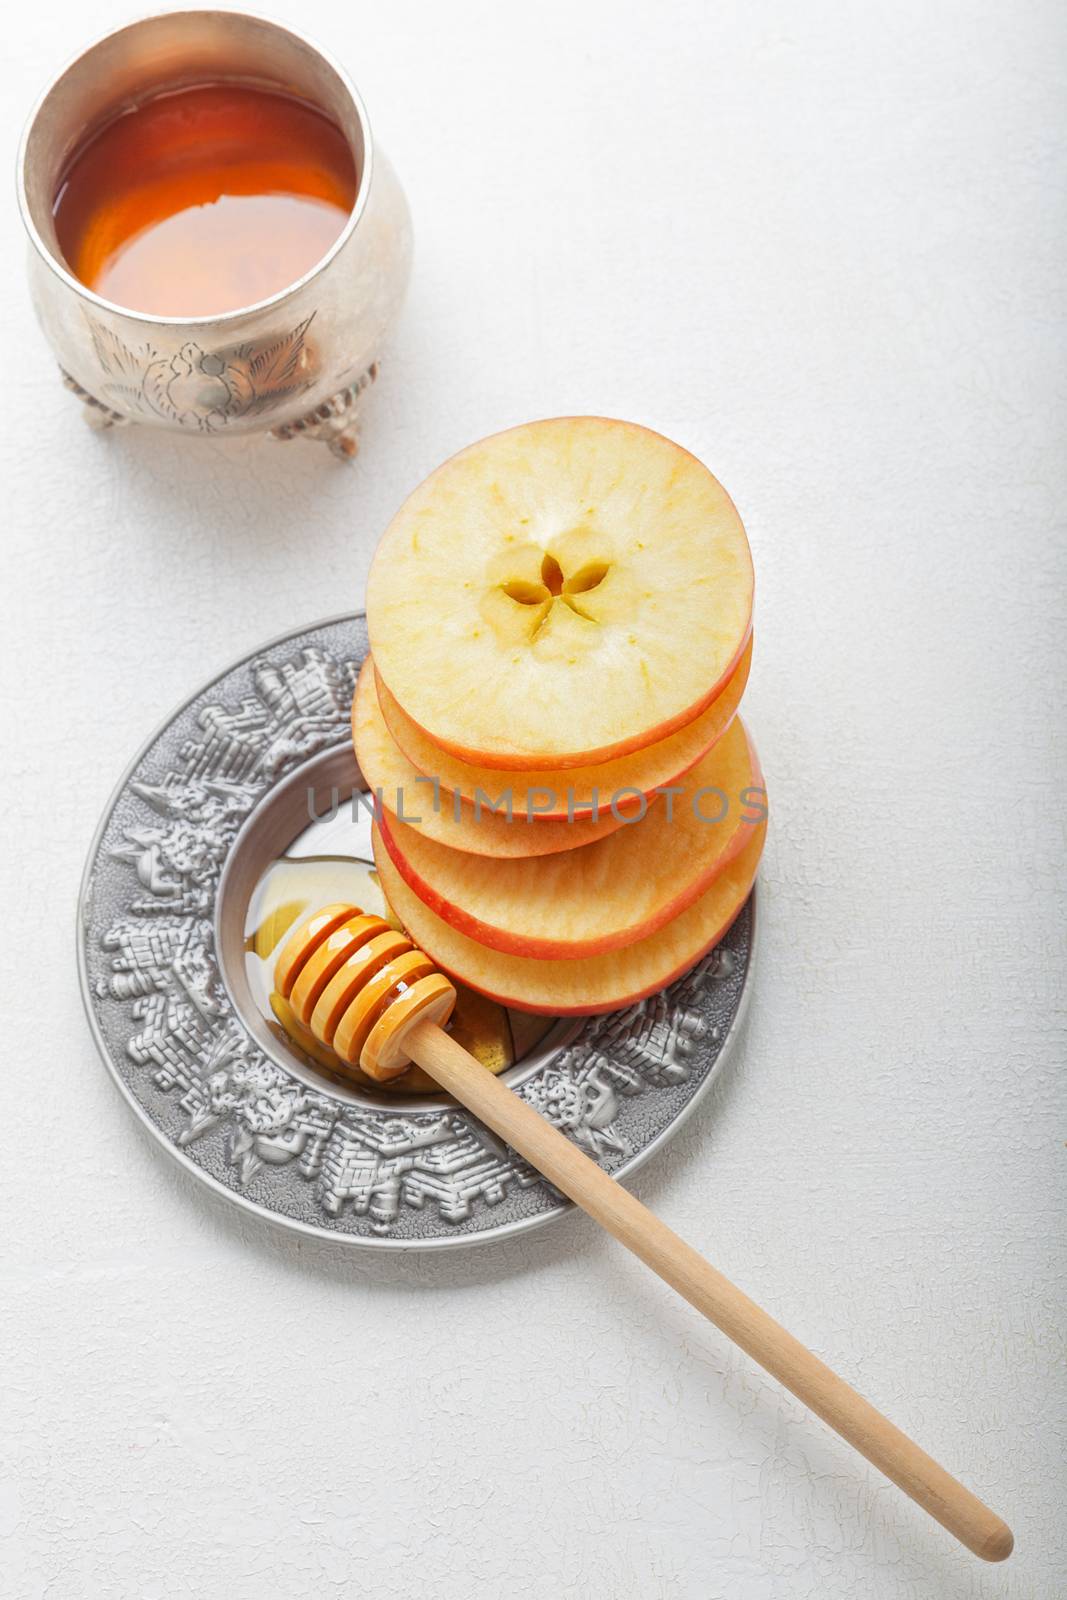 Honey and apples for Rosh Hashanah  by supercat67